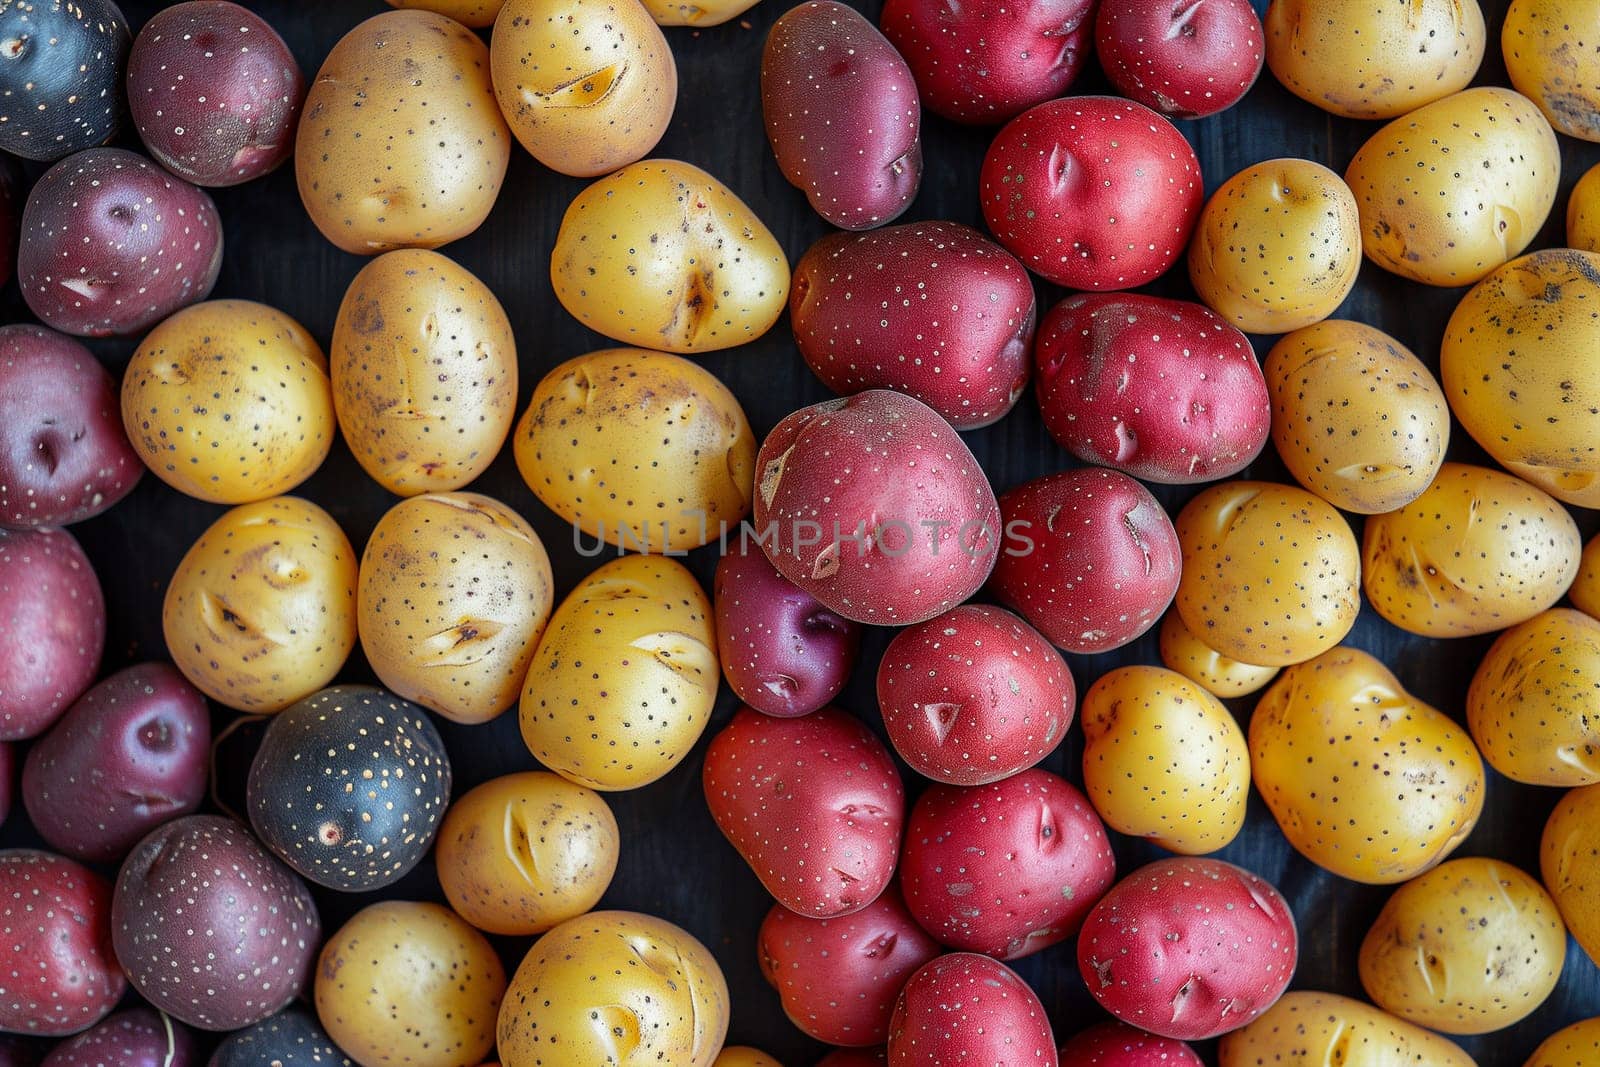 Assorted Potatoes in Various Colors by Sd28DimoN_1976